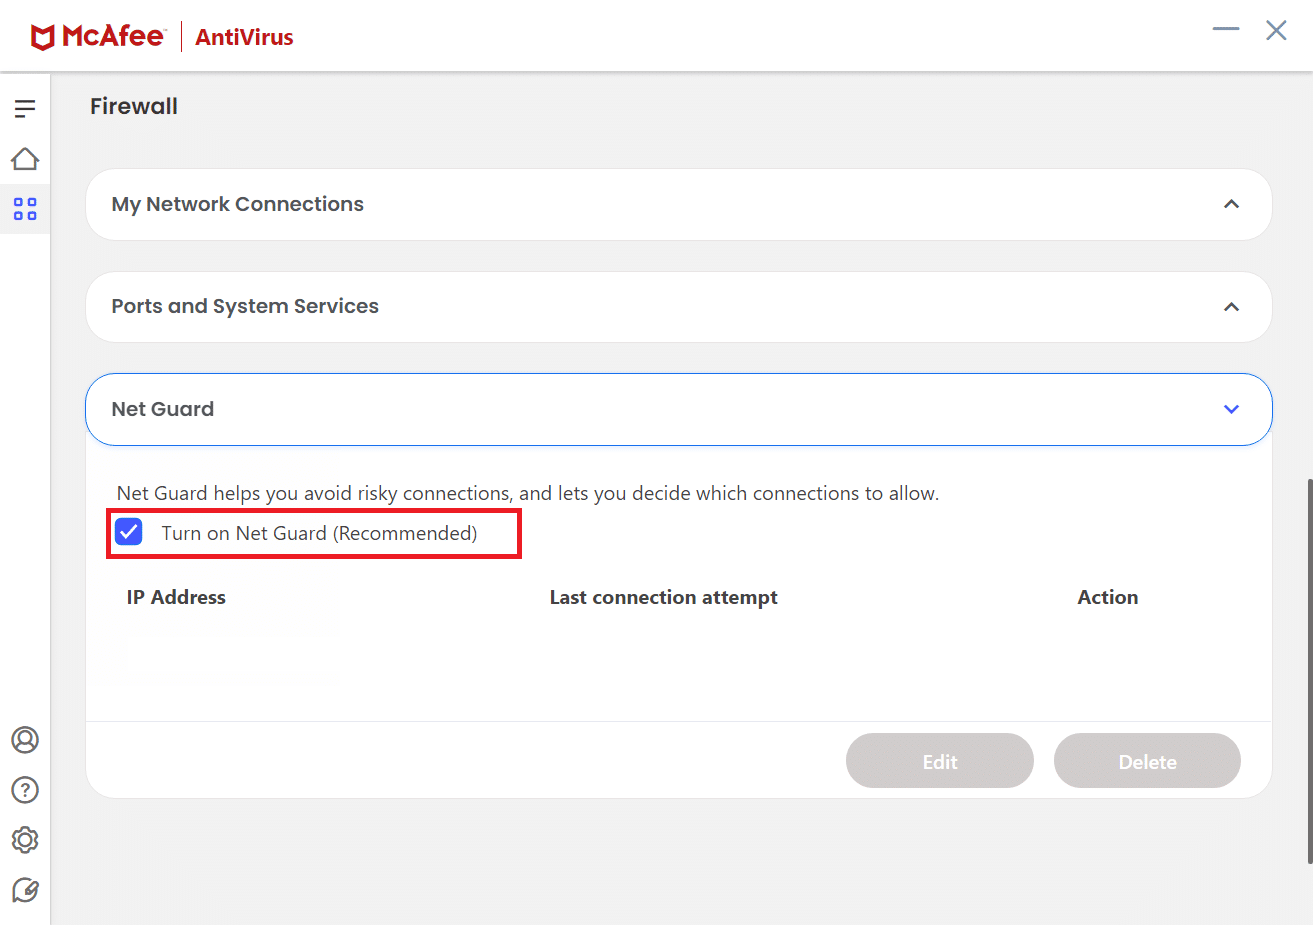 Uncheck the option Turn on Net Guard Recommended